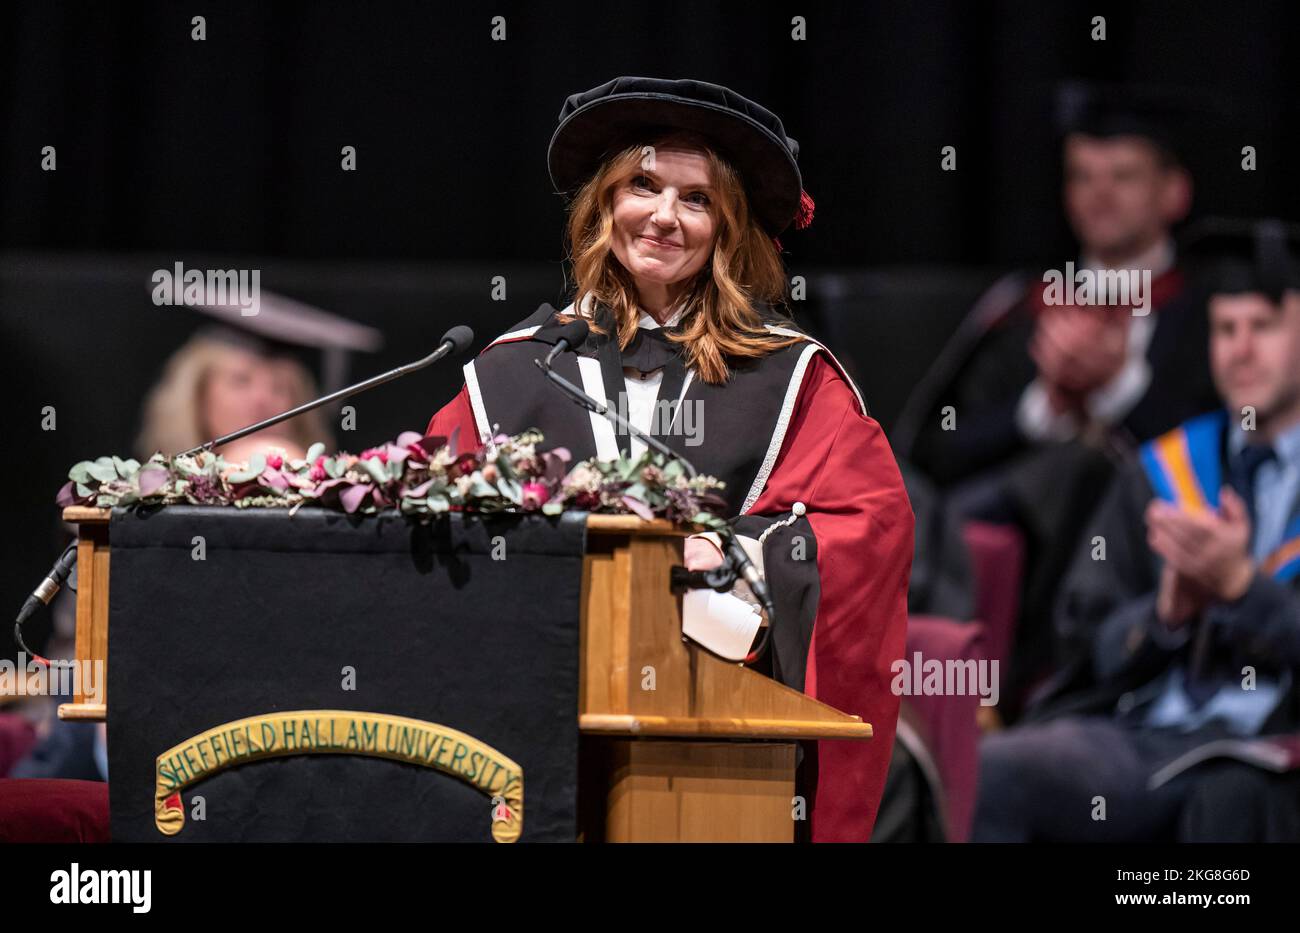 Geri Halliwell-Horner addresses the audience after she received an honorary doctorate from Sheffield Hallam University at Ponds Forge International Sports Centre in Sheffield. Picture date: Tuesday November 22, 2022. Stock Photo